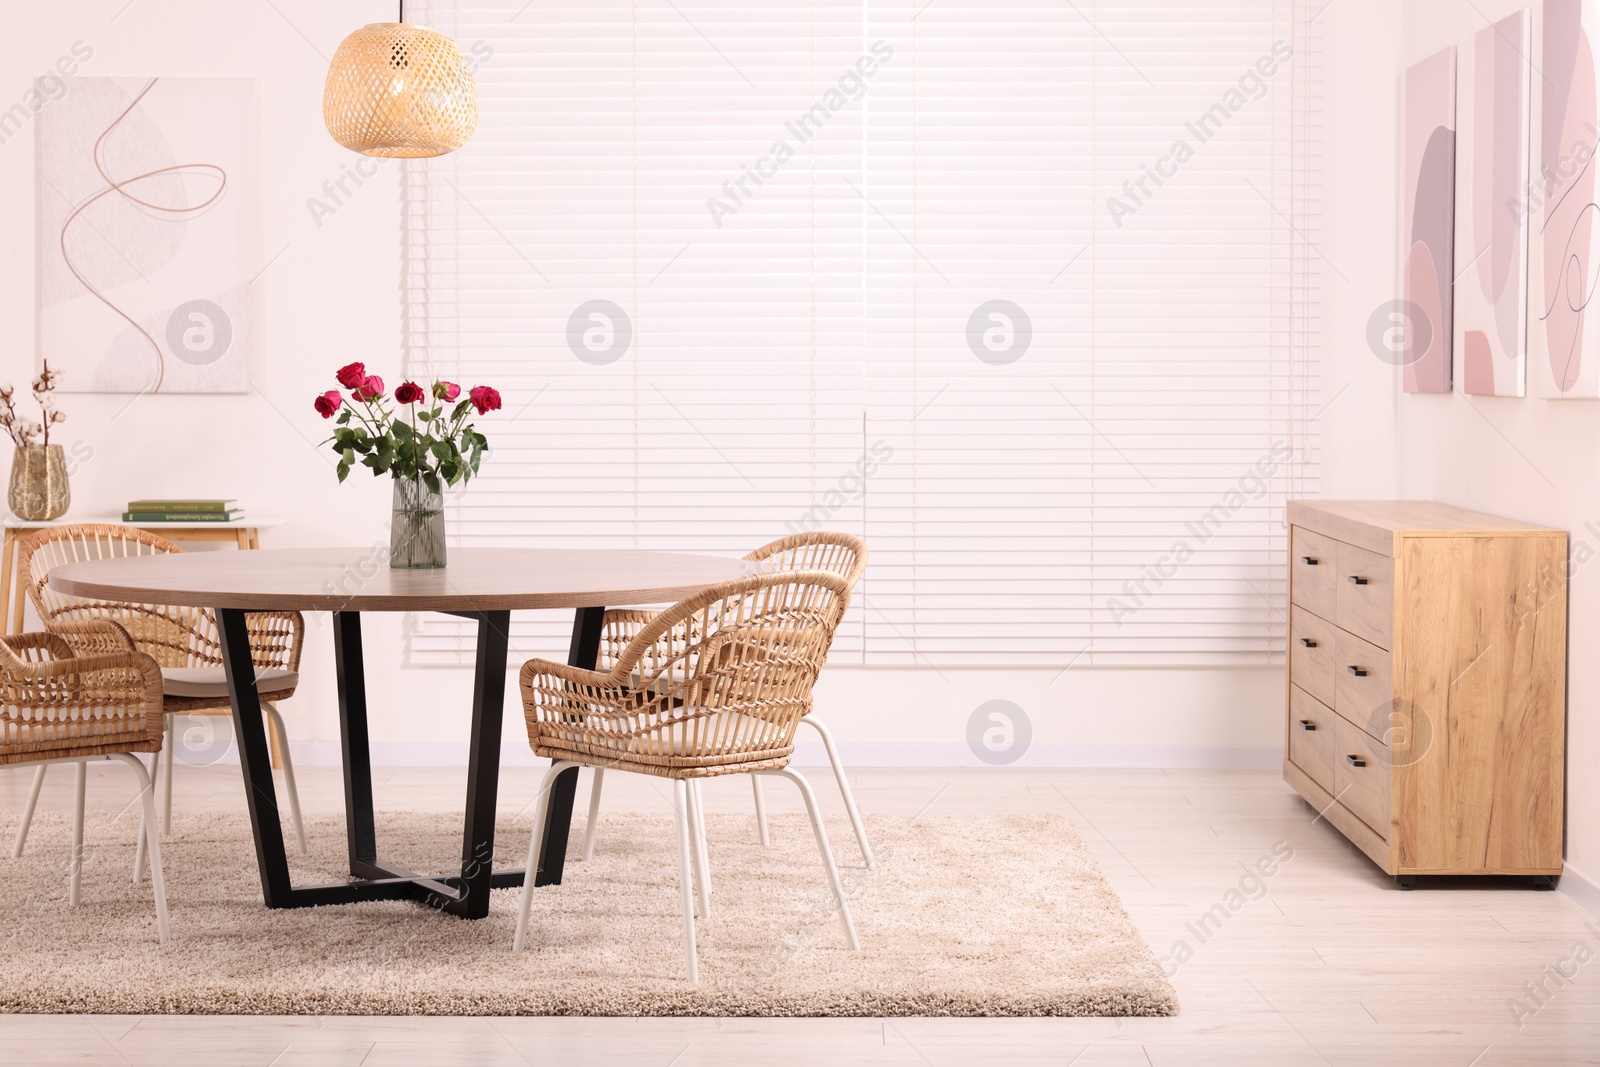 Photo of Stylish dining room interior with comfortable furniture